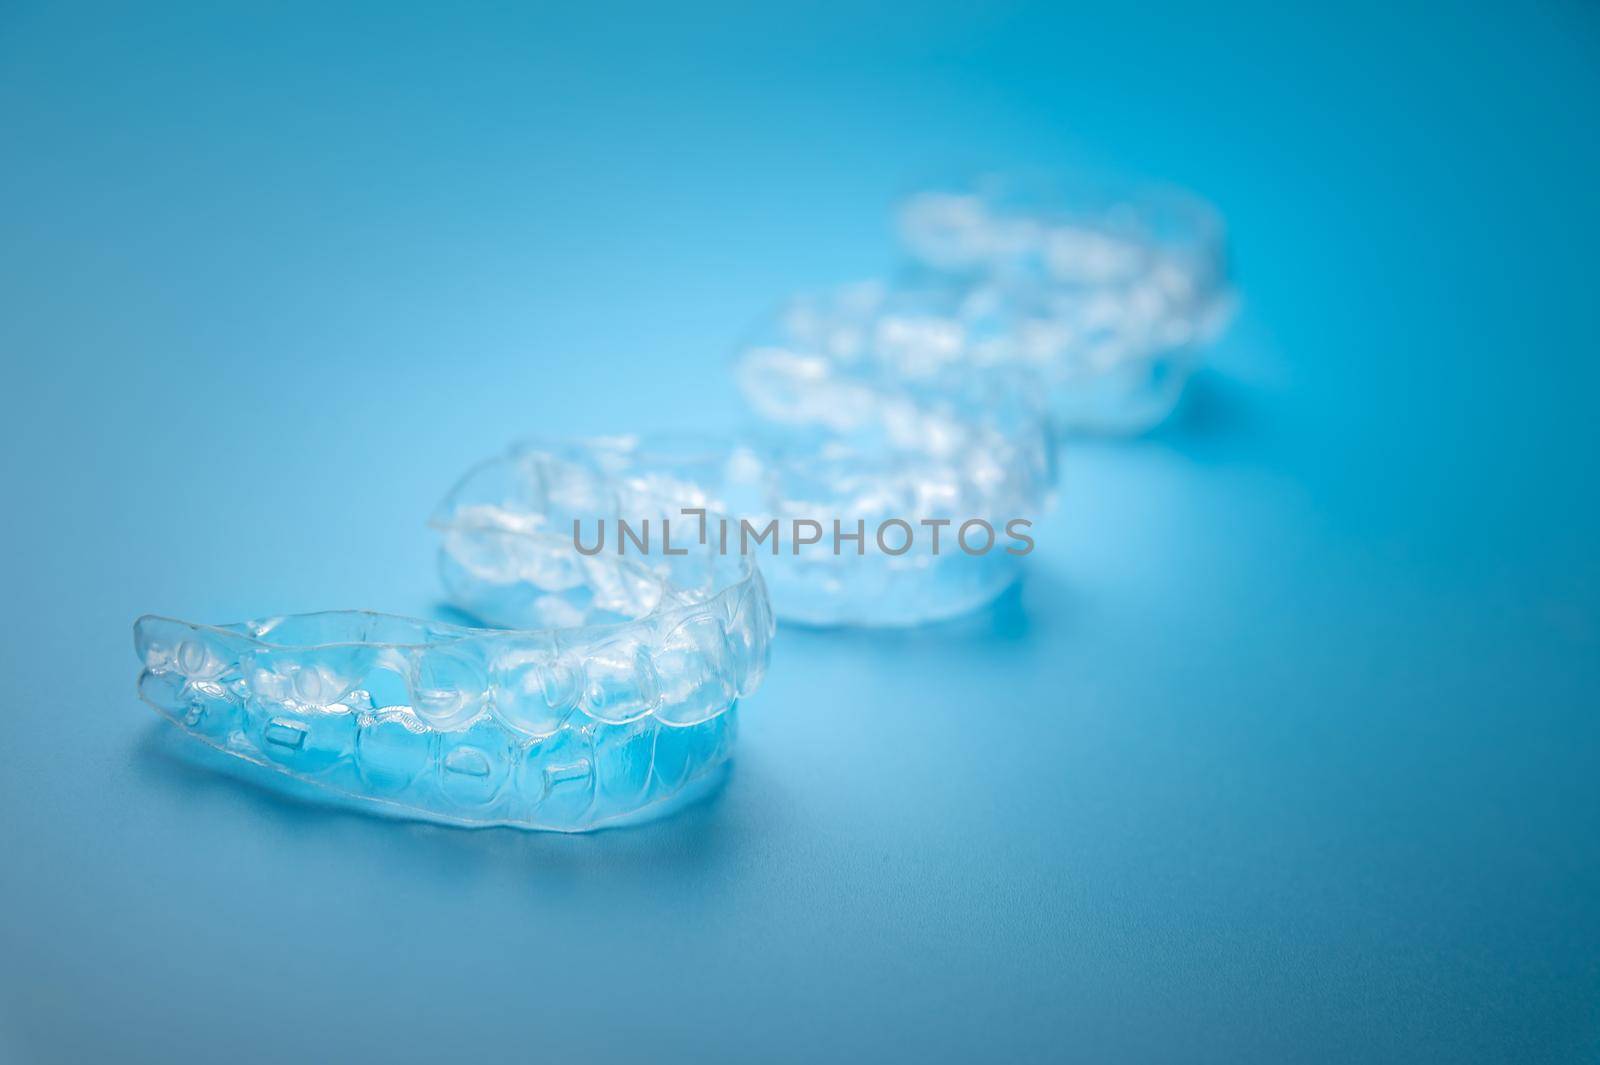 Invisible aligners on a blue background with copy space. Plastic braces for teeth alignment by yanik88